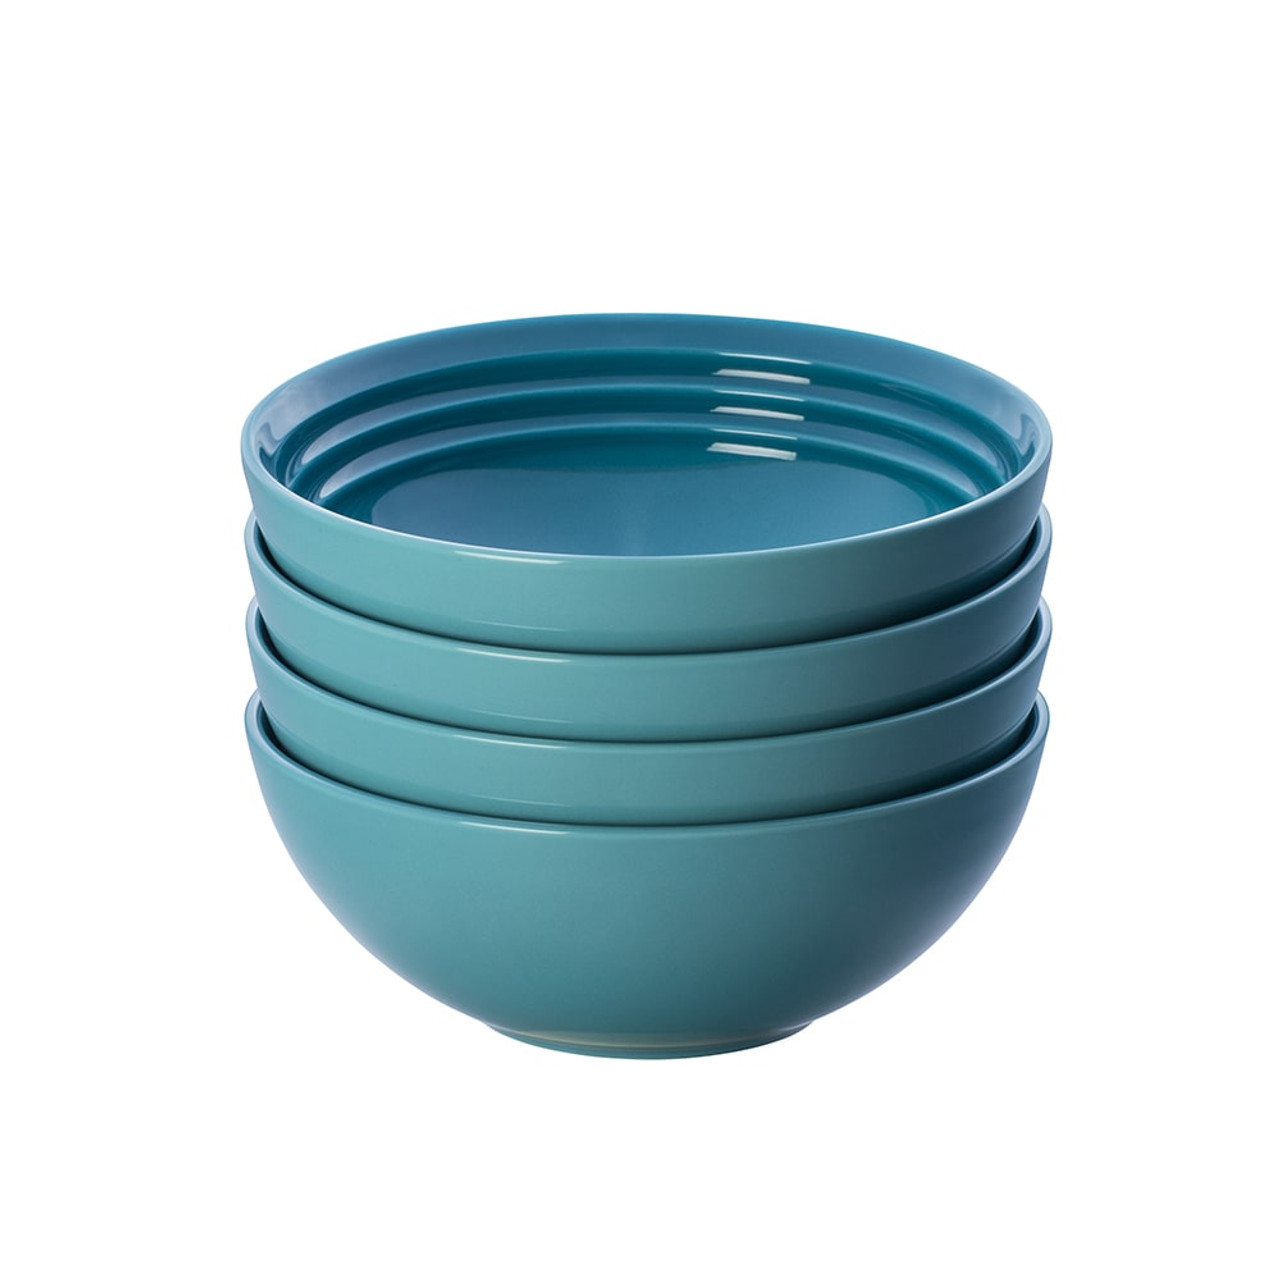 https://cdn11.bigcommerce.com/s-hccytny0od/images/stencil/1280x1280/products/2110/6836/le-creuset-soup-bowls-caribbean__83575.1592000506.jpg?c=2?imbypass=on